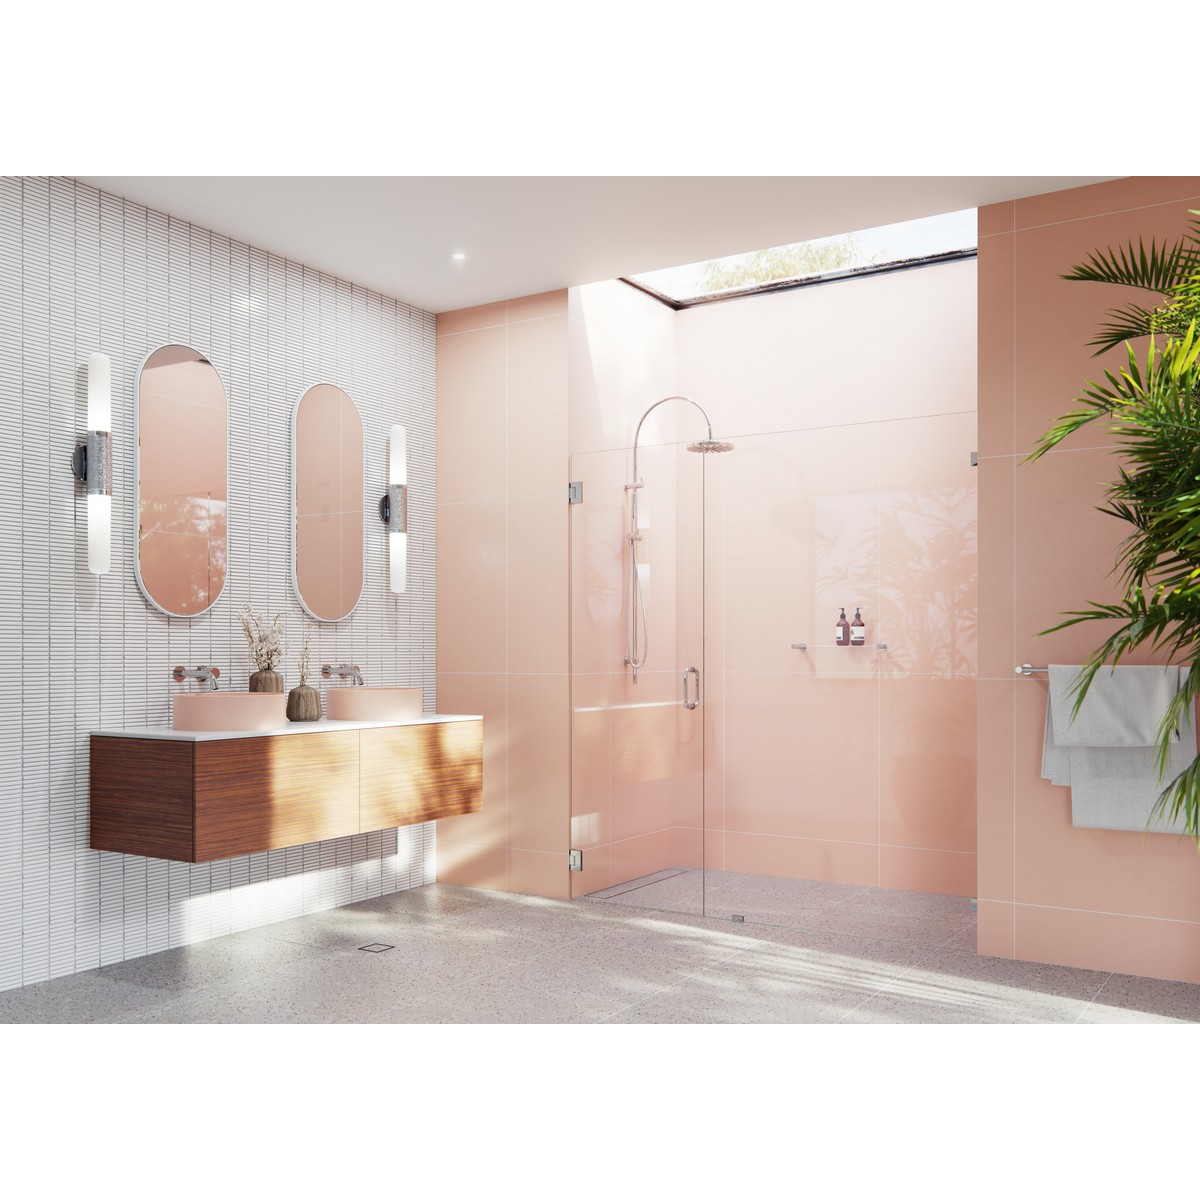 GLASS WAREHOUSE GW-WH-78.25 ILLUME 78 1/4 W X 78 H WALL HINGED FULLY FRAMELESS GLASS SHOWER ENCLOSURE